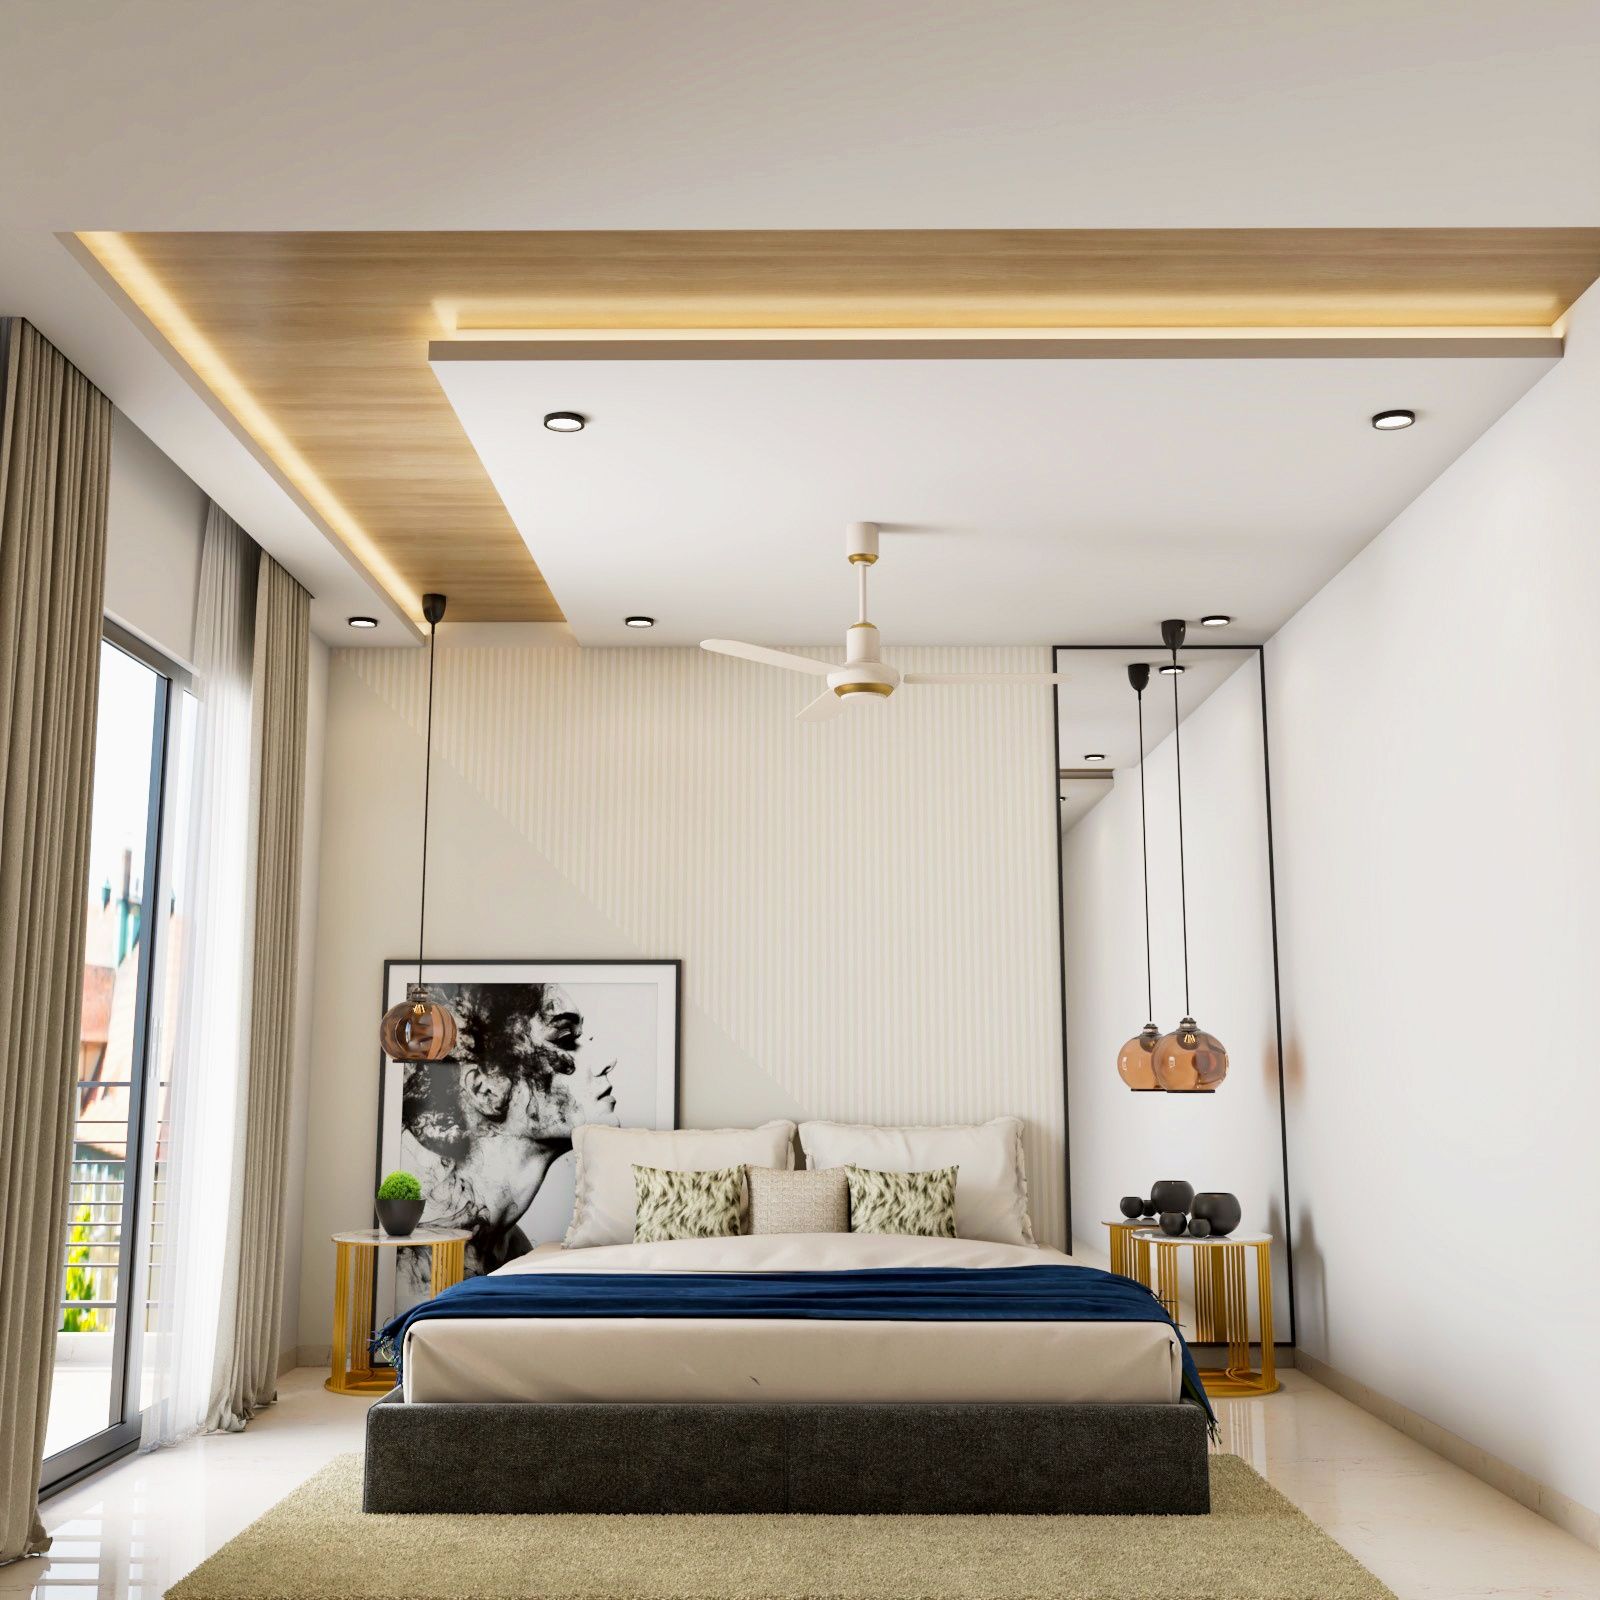 Multilayered White And Wood Bedroom Ceiling Design